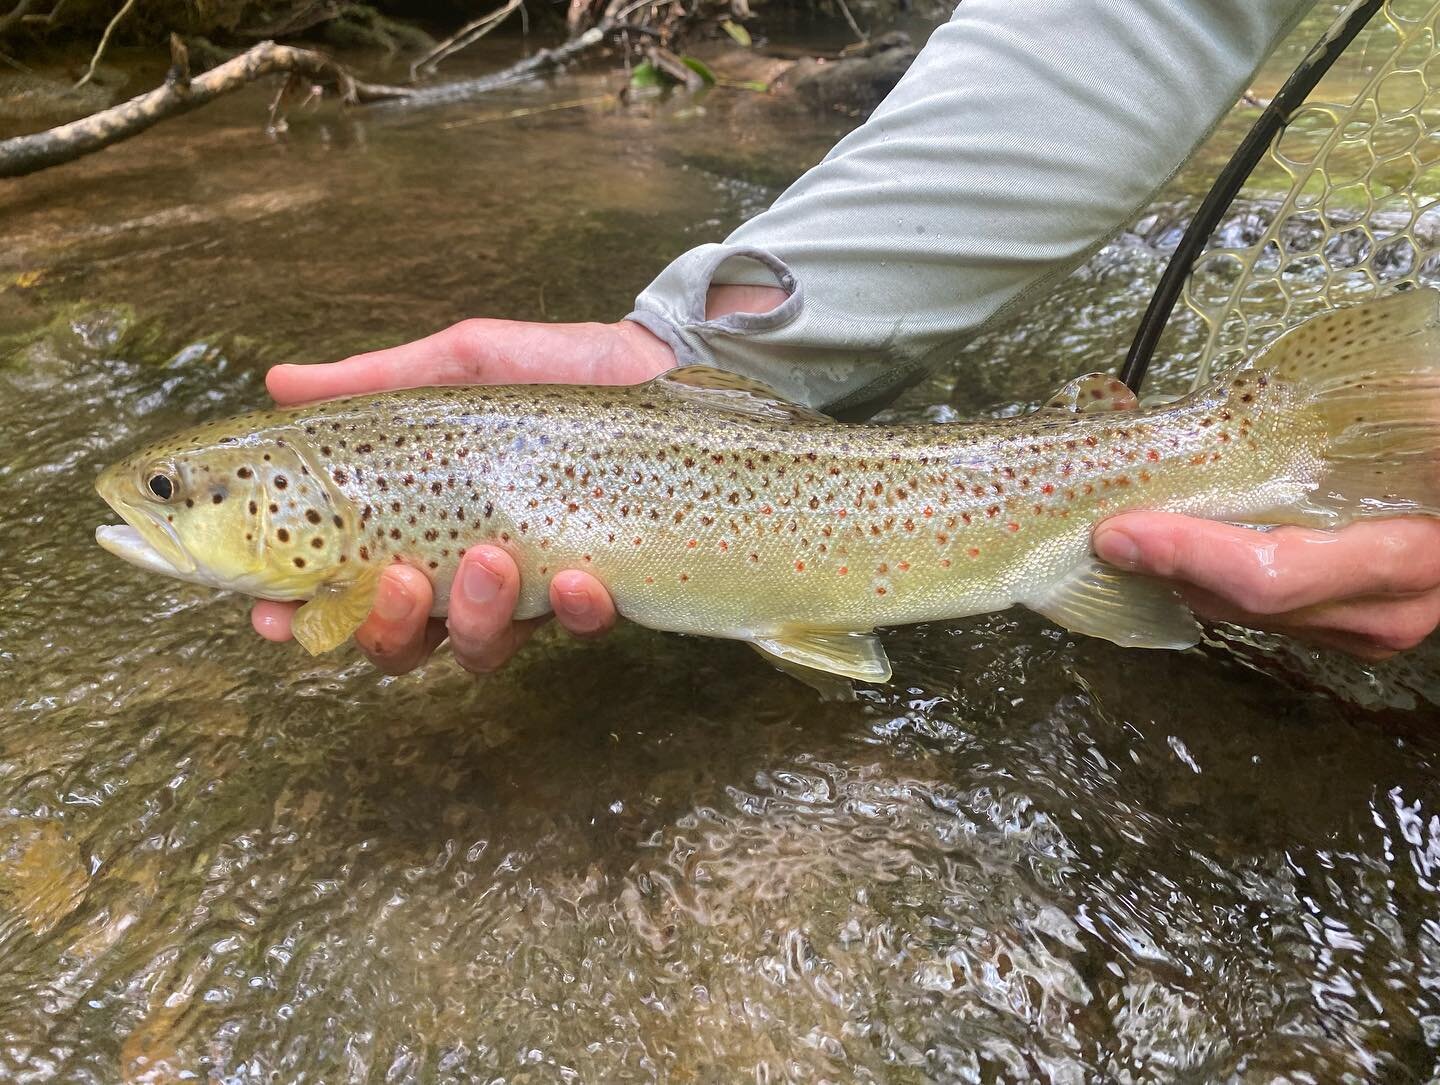 Post #2 of North Georgia trout fishing - Monday we hiked way up Coleman River and then over to the headwaters of the &ldquo;hooch&rdquo; and today we spend the morning at Smithgall Woods - making some memories.